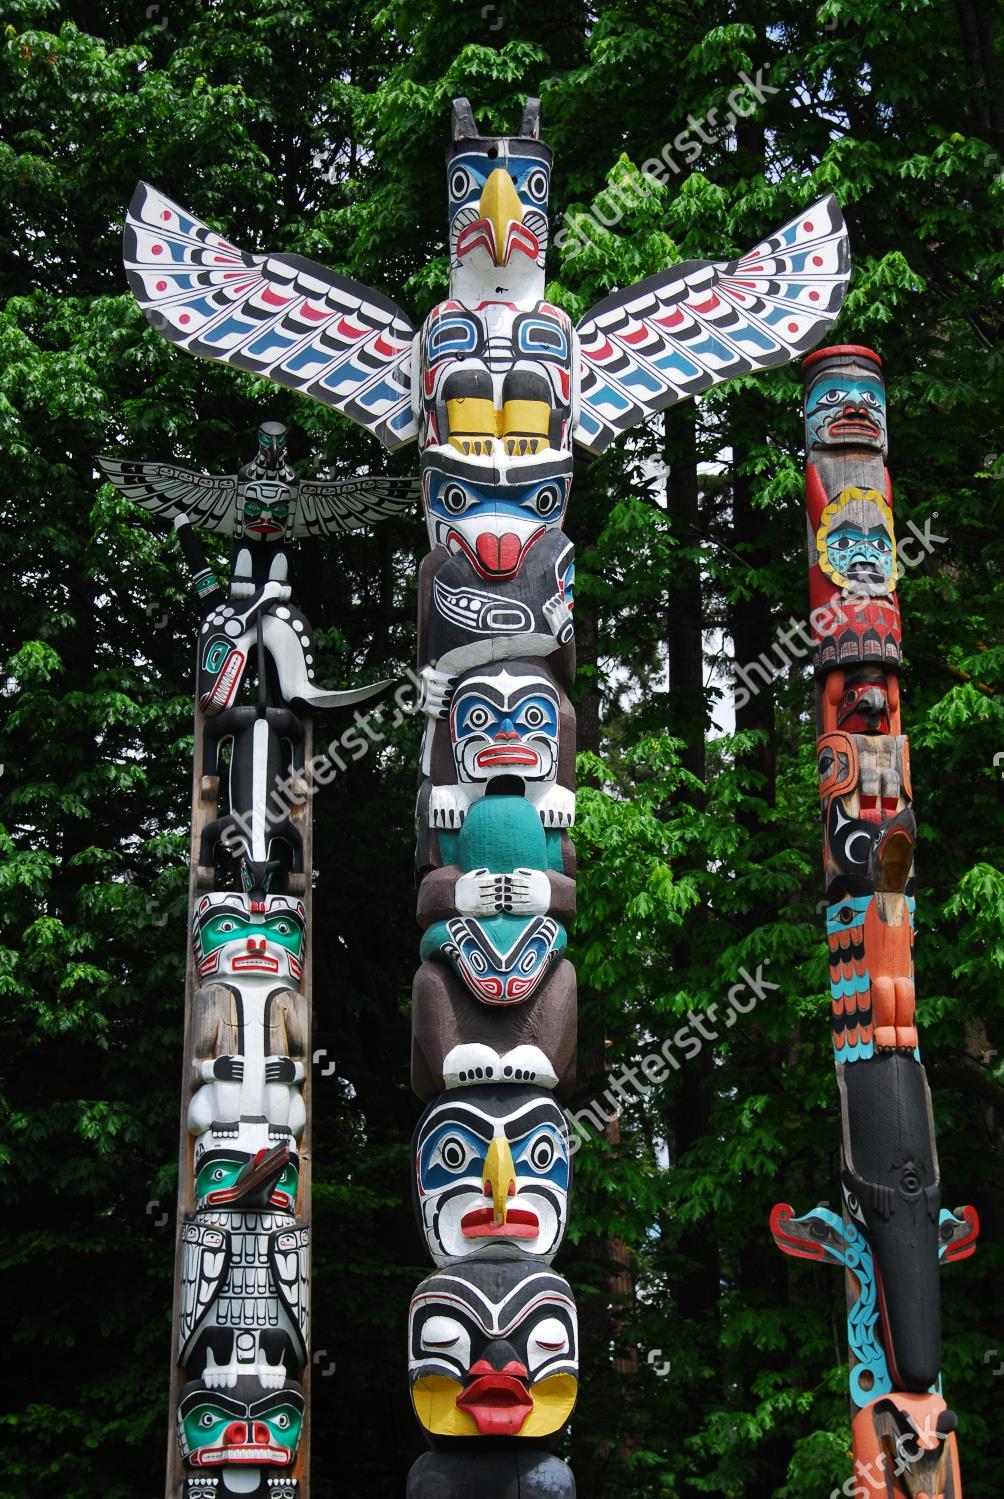 Totem Poles Totem pole carvers were seen as the master carvers in the community. They had to go through an apprenticeship before doing any poles.